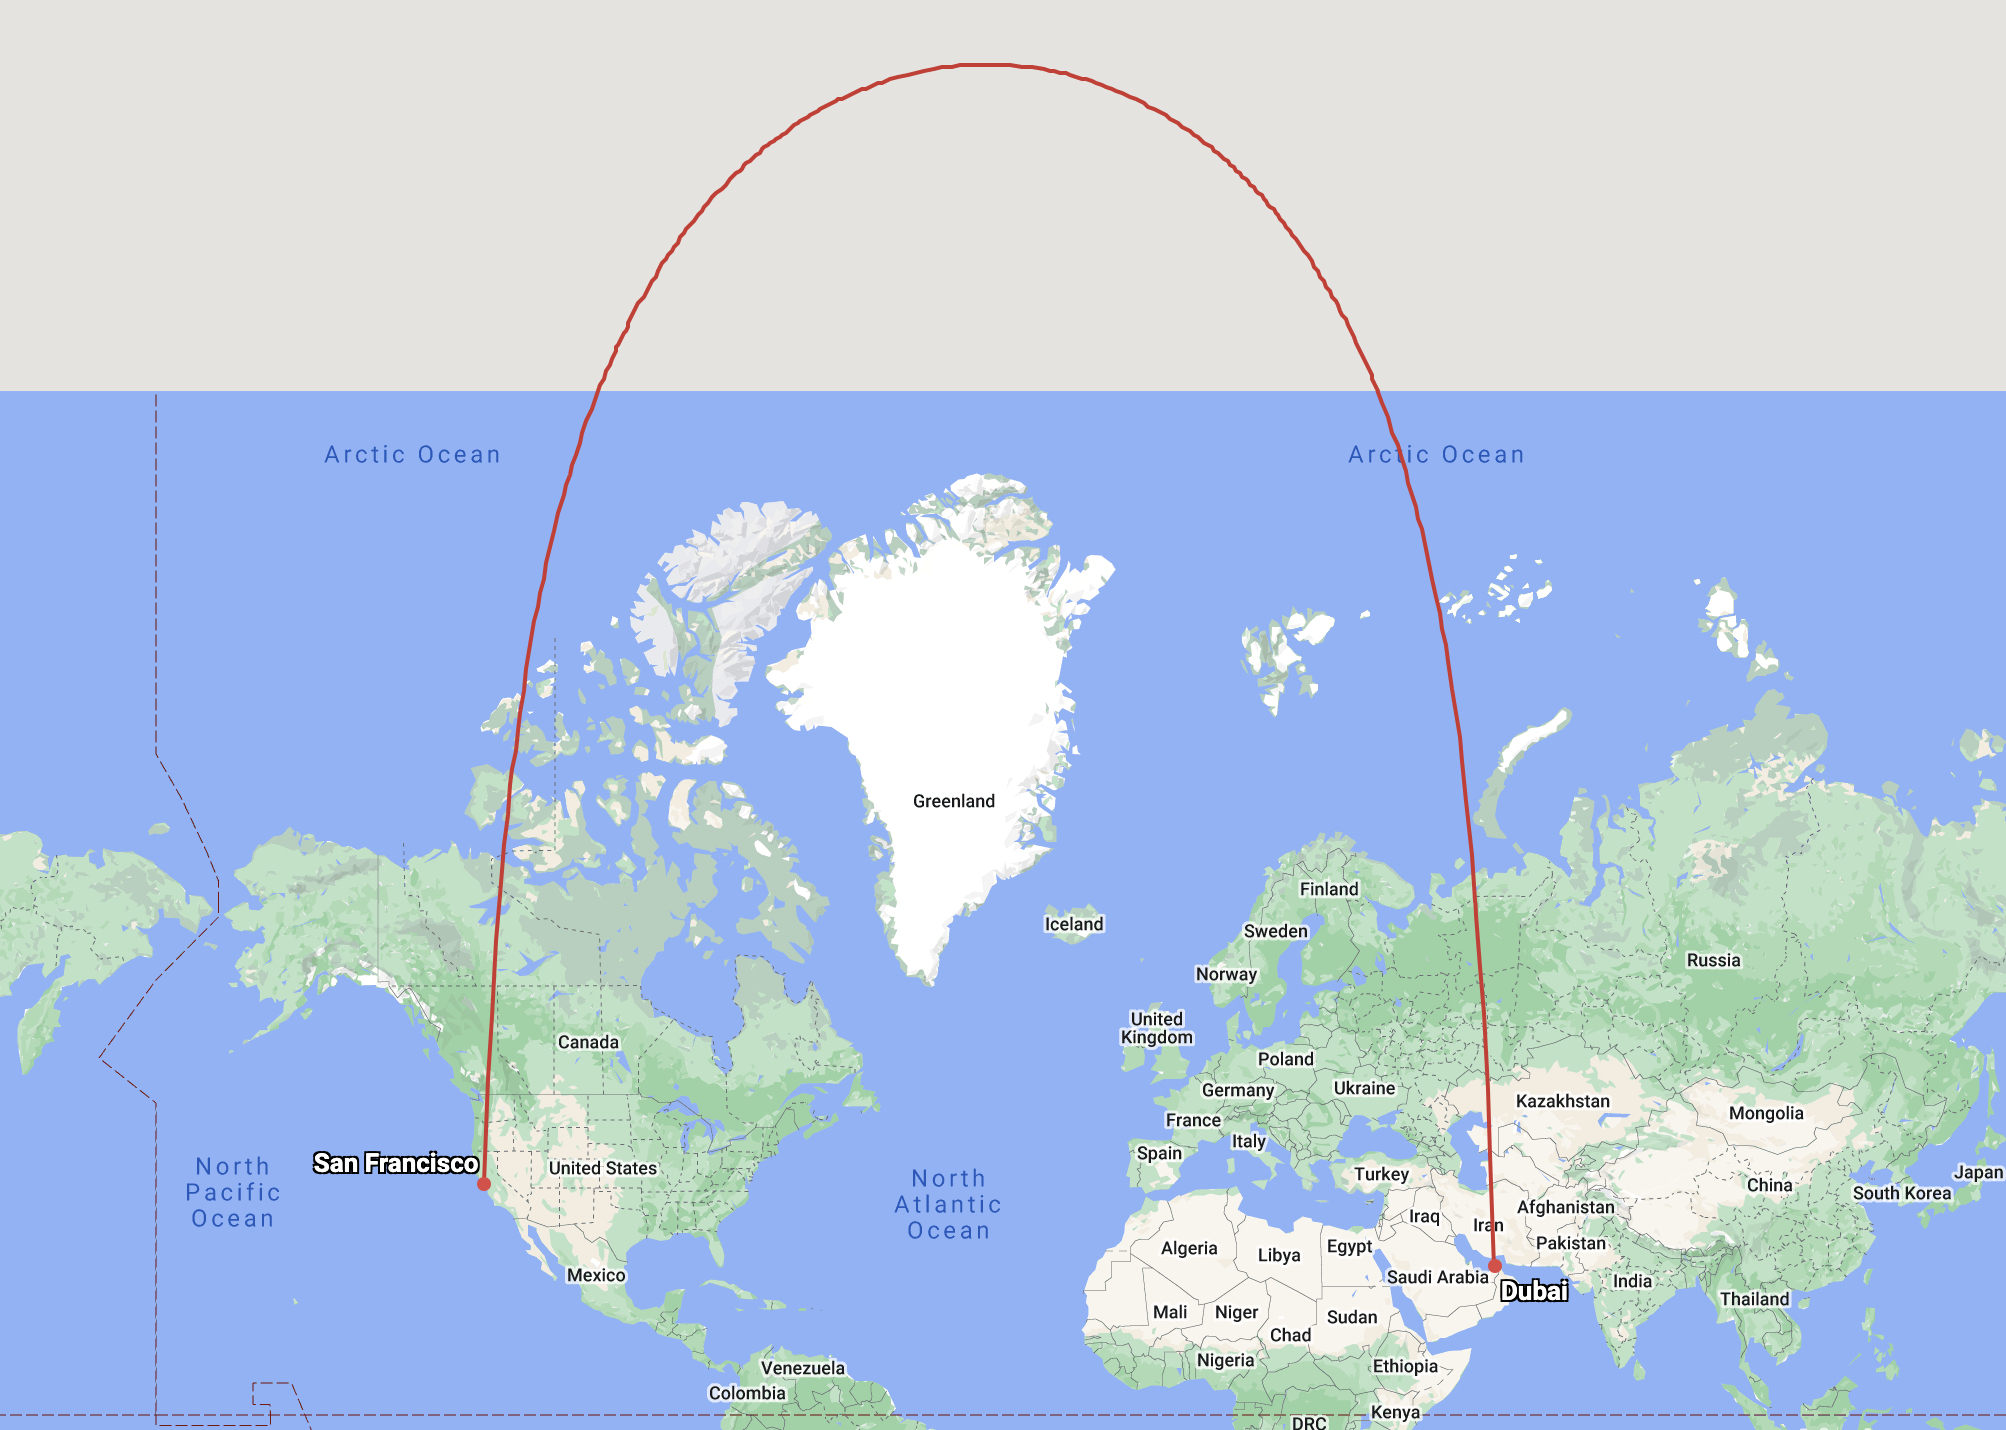 The same line on a Mercator map. The line is of the map